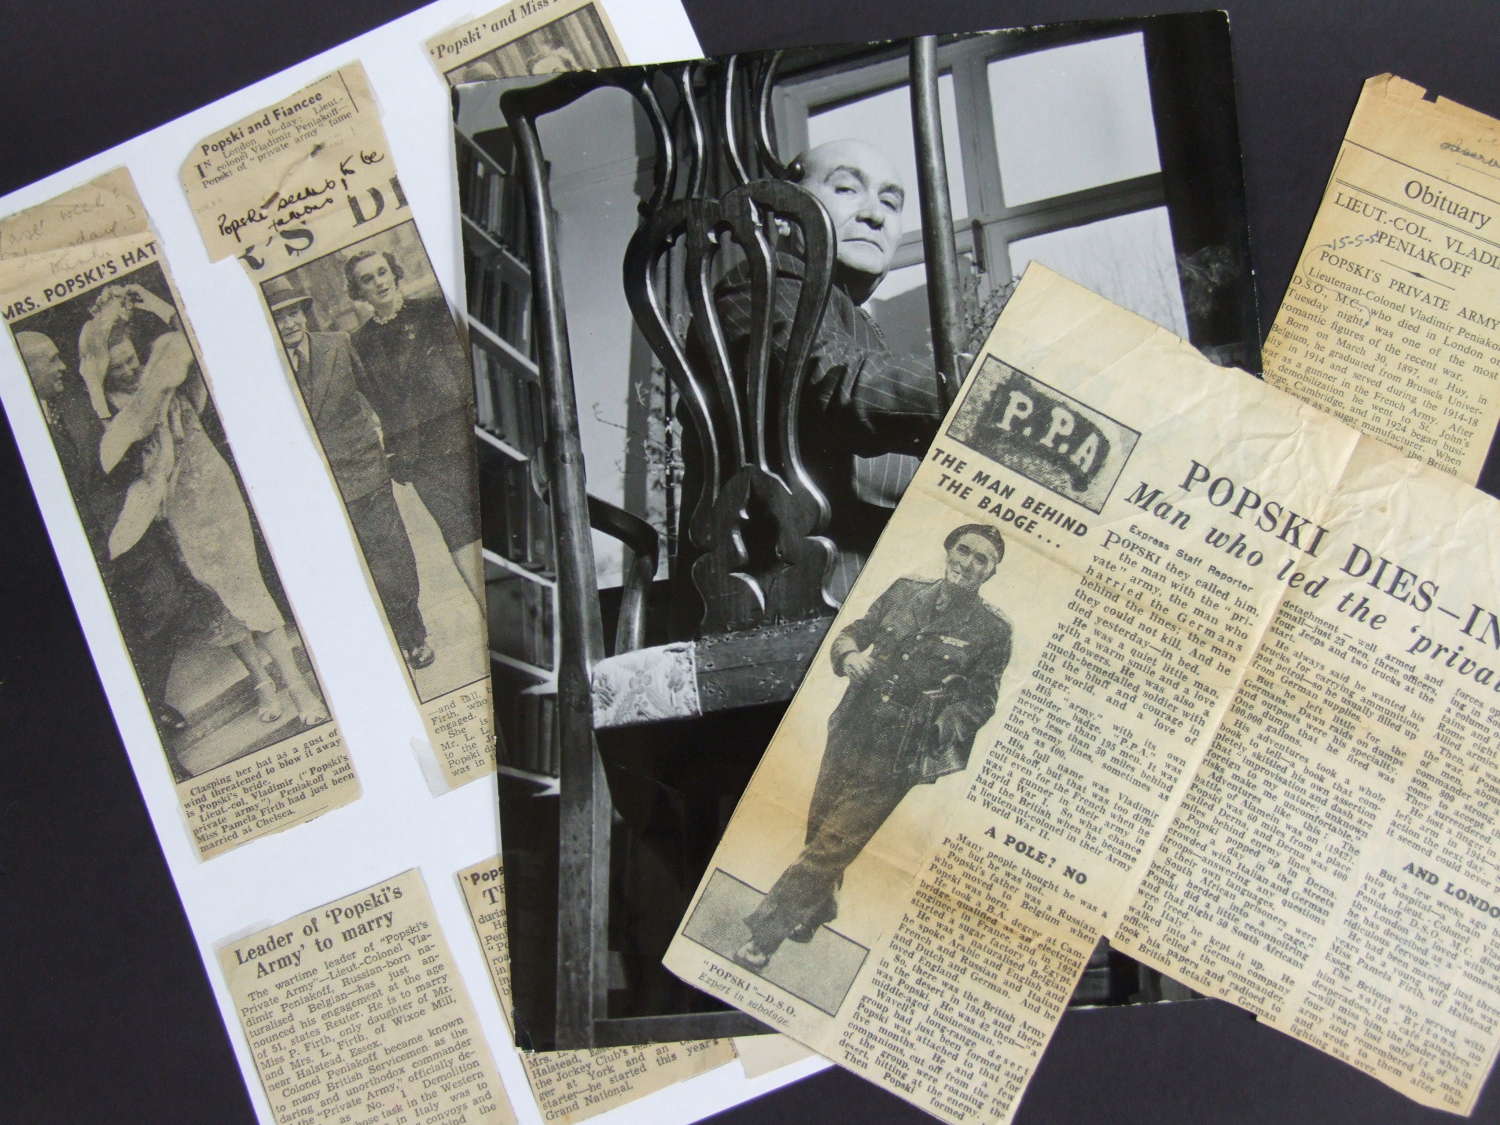 Press Release Photograph and Newspaper Cuttings, Popski's Private Army